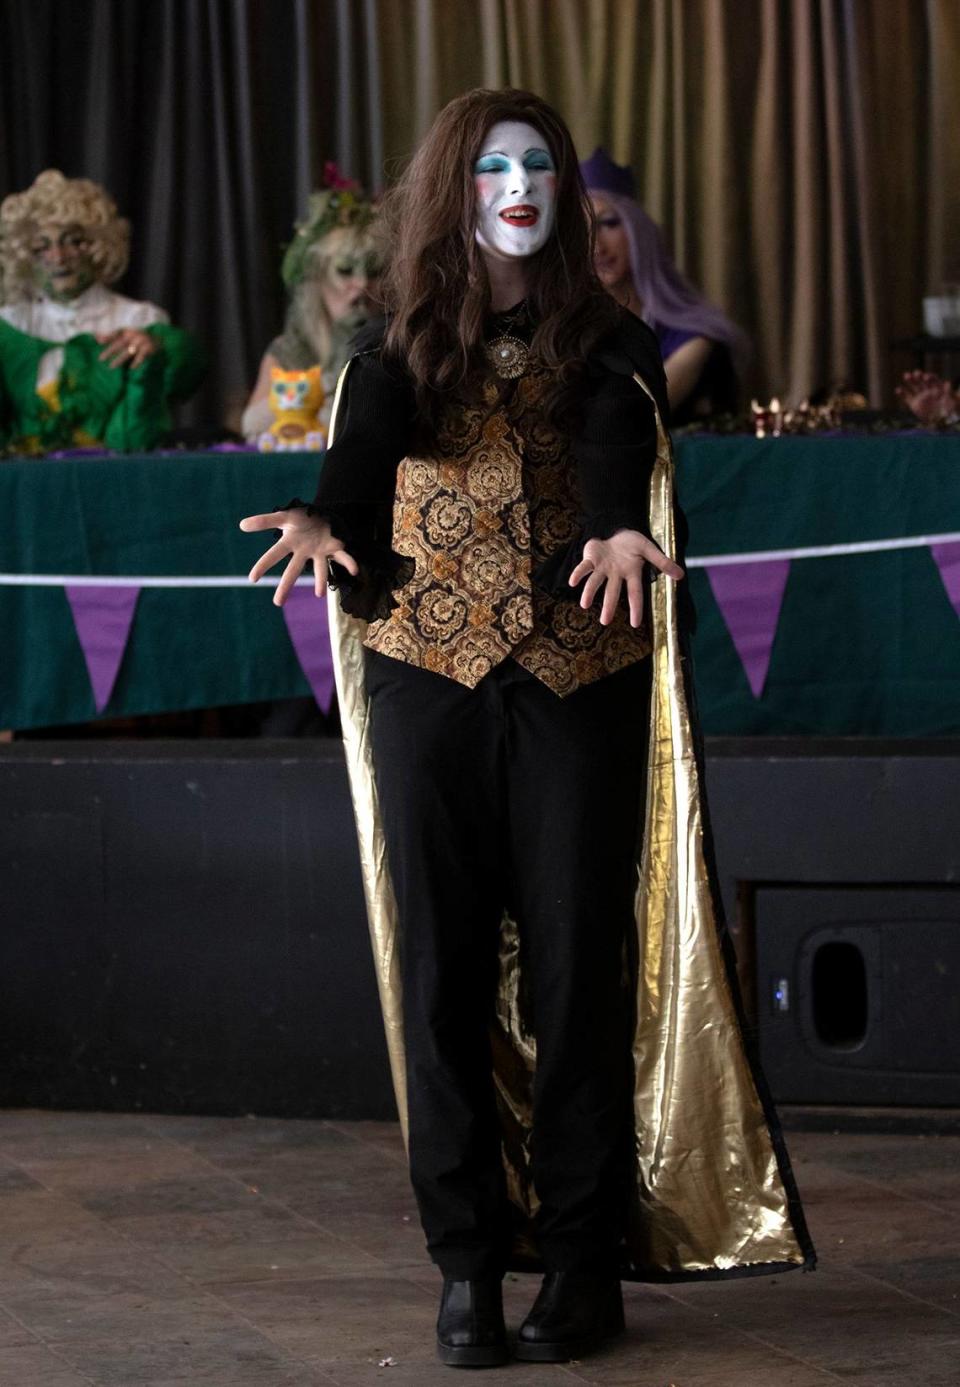 Gray Gautereaux, dressed in drag as Jackson Havoc, performed “You’ll Be Back” from Hamilton at a fairytale-themed drag show at Bang the Drum Brewery on March 23, 2024.